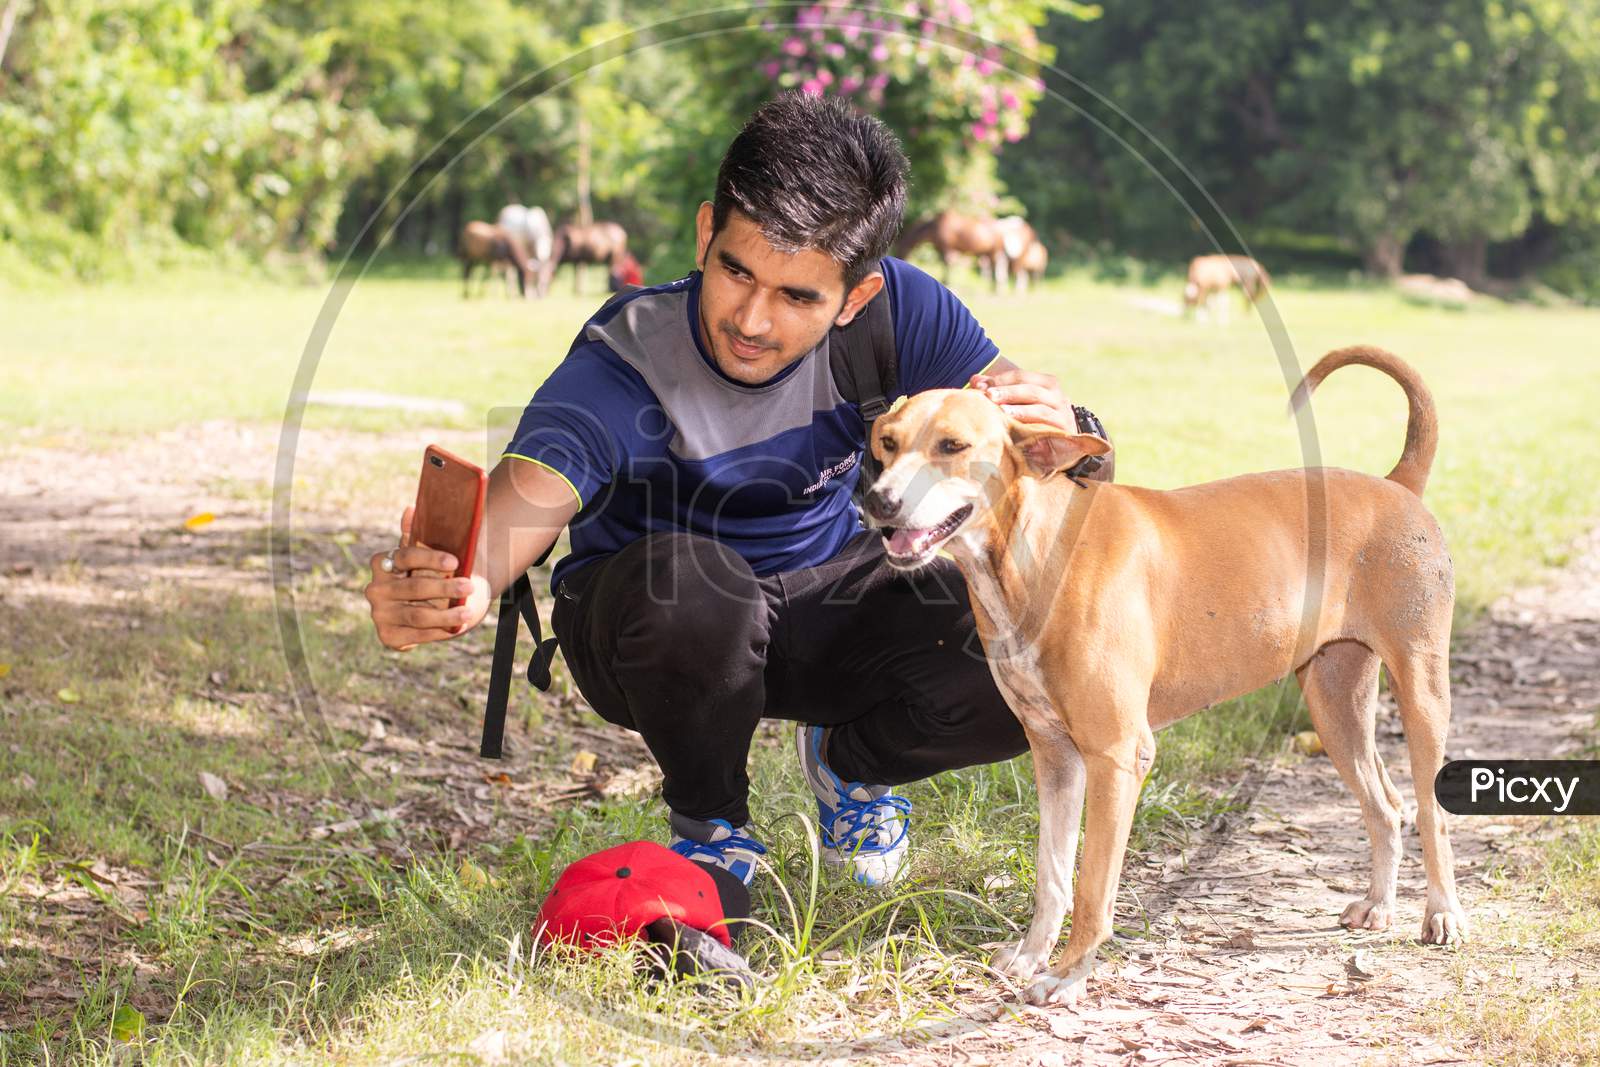 Young sports man taking selfie with dog in park, Animal lover and healthy sportsman concept.